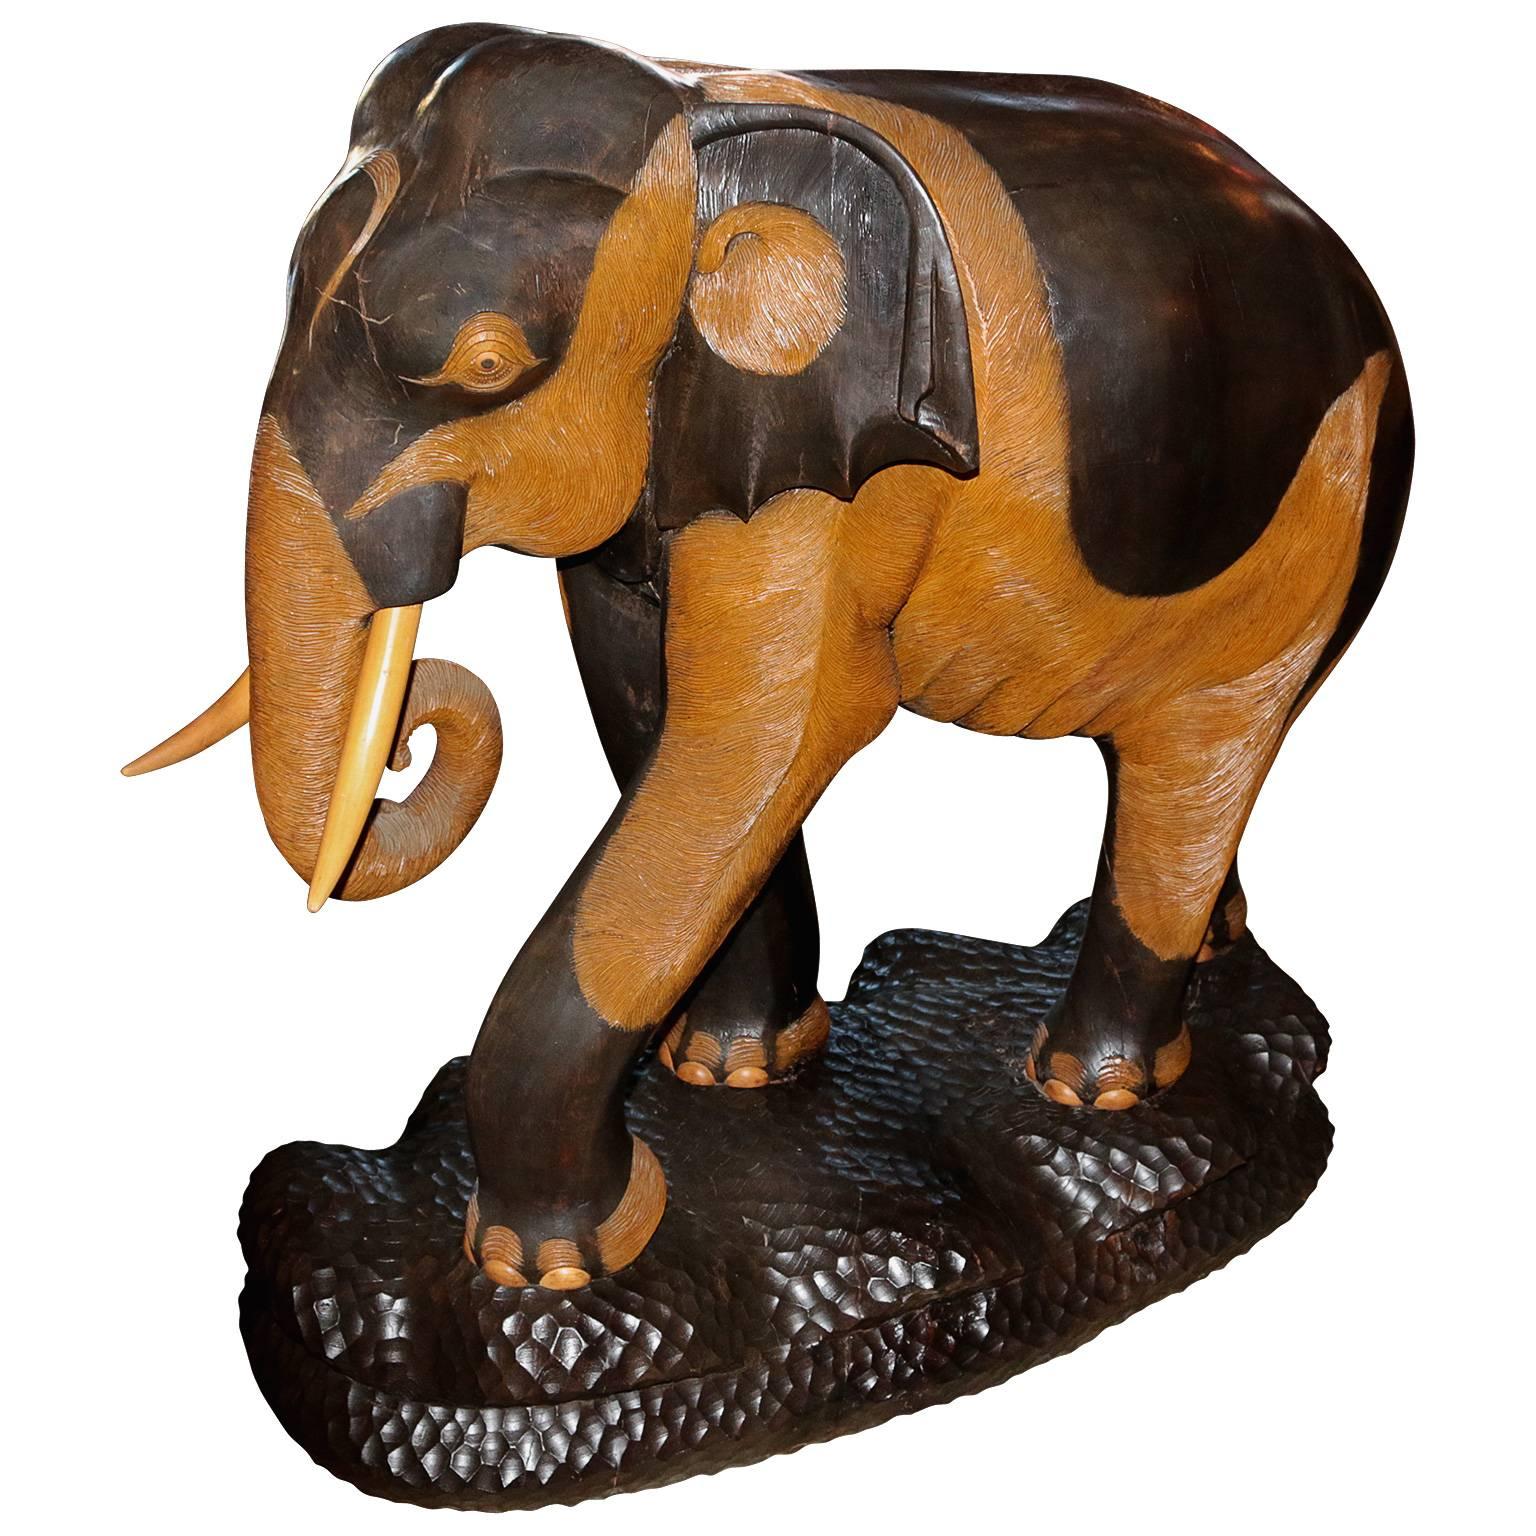 Hand-carved and painted mahogany elephant with life-sized features. Each part of the elephant has tremendous attention to detail. From the legs up, the ruffles on the skin of the elephant follow throughout the entire body. The attention given to the